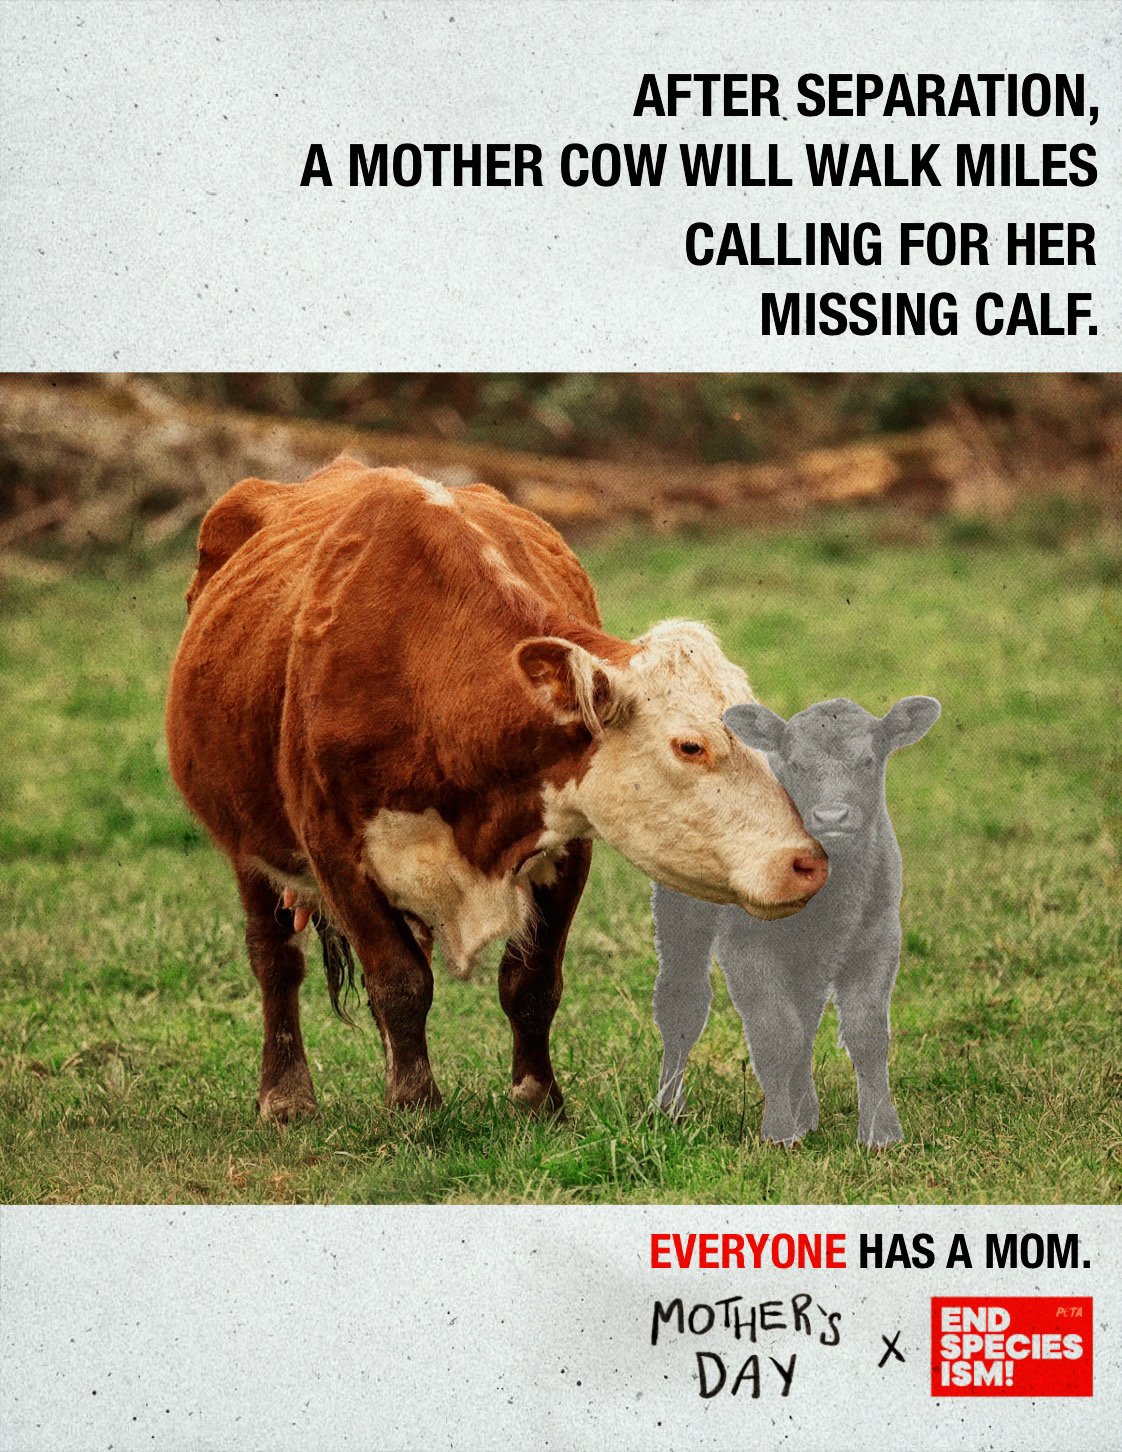 Print ad featuring a cow and a greyed-out calf at her side. The text at the top reads "After separation a mother cow will walk miles calling for her missing calf." and the bottom text reads "everyone has a mom. Mother